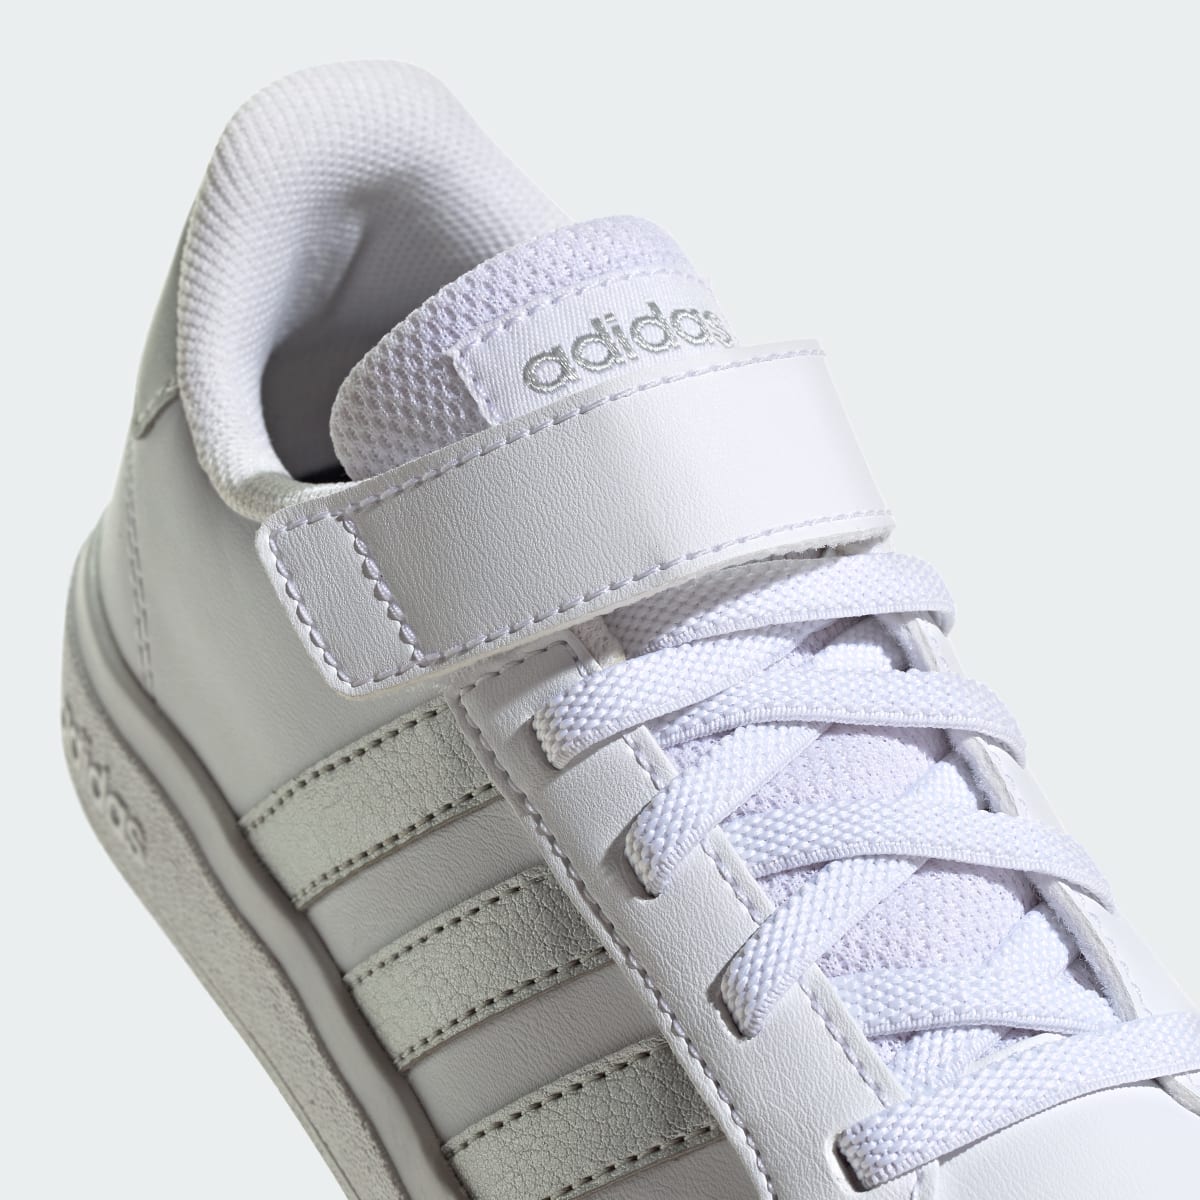 Adidas Grand Court Elastic Lace and Top Strap Shoes. 8